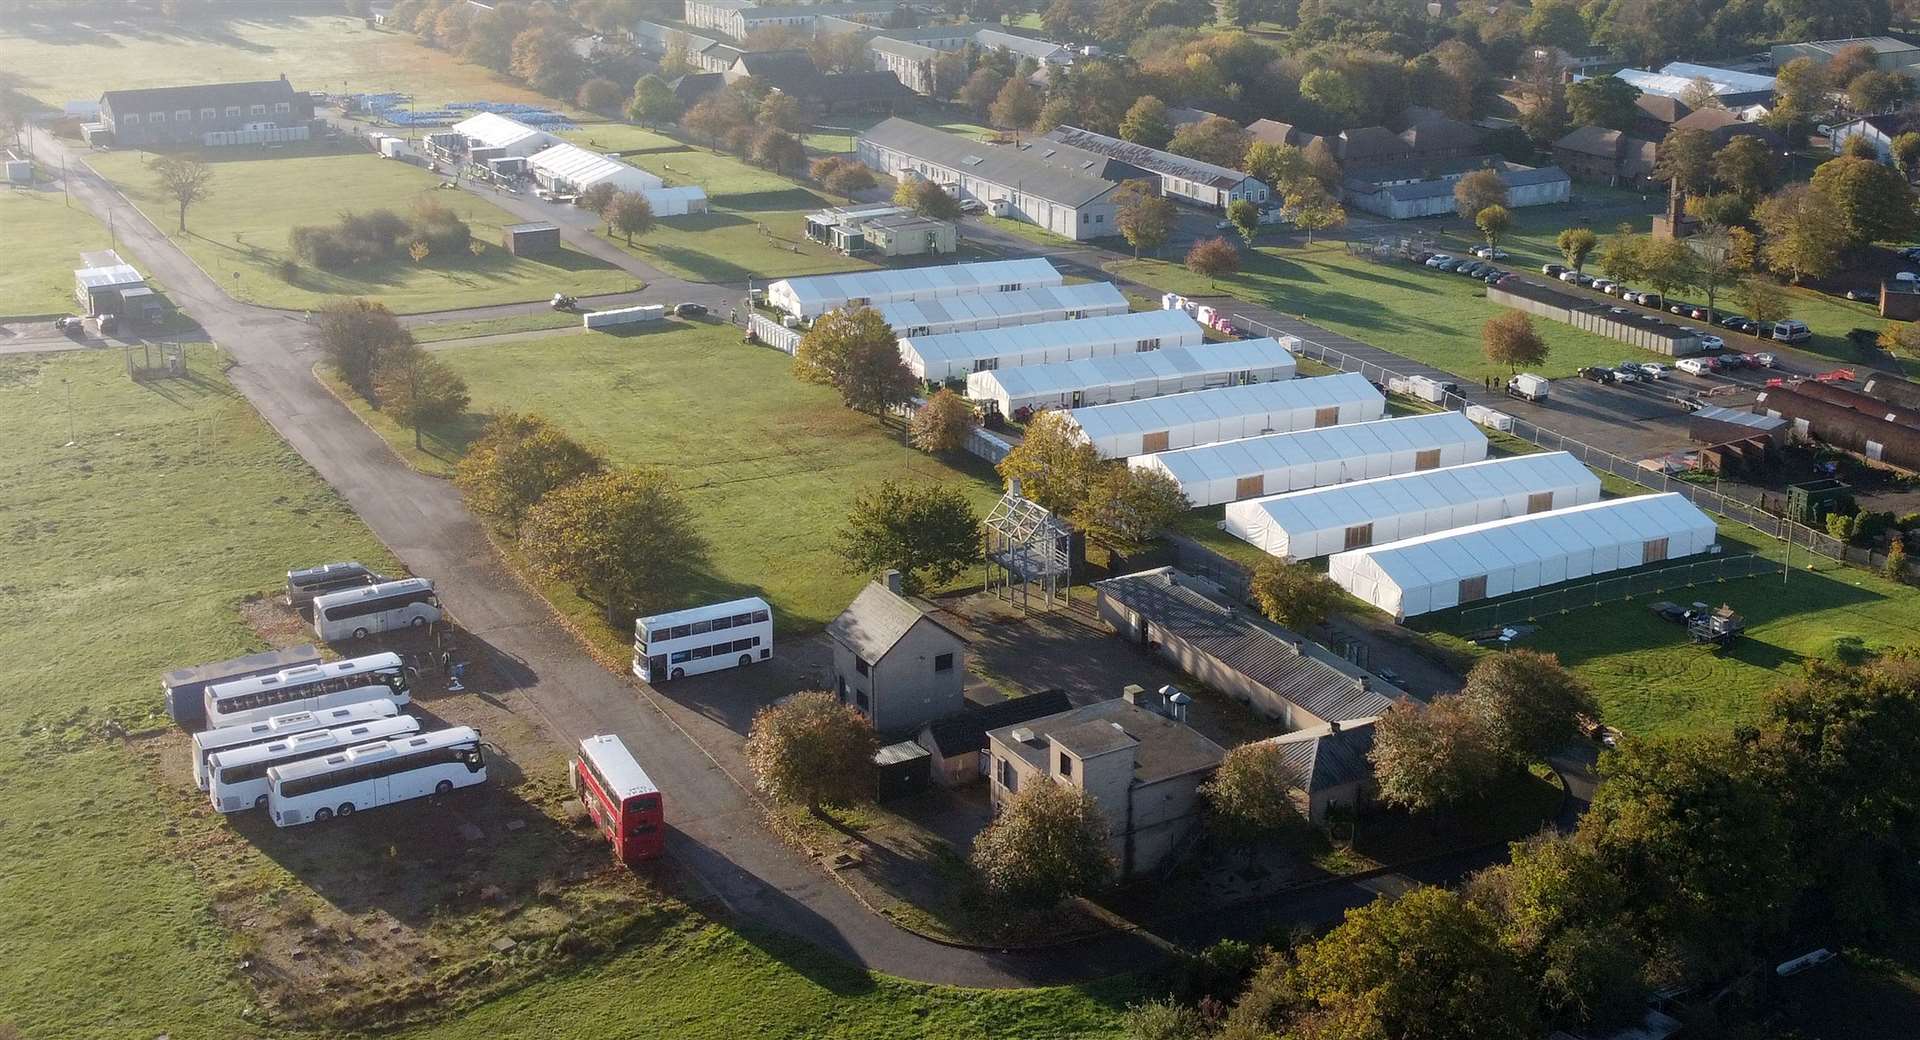 A view of the Manston immigration short-term holding facility located at the former Defence Fire Training and Development Centre in Thanet, Kent. 700 people were moved to the Manston facility for safety reasons after incendiary devices were thrown at a Border Force migrant centre in Dover on Sunday. Picture date: Monday October 31, 2022. Photo: PA